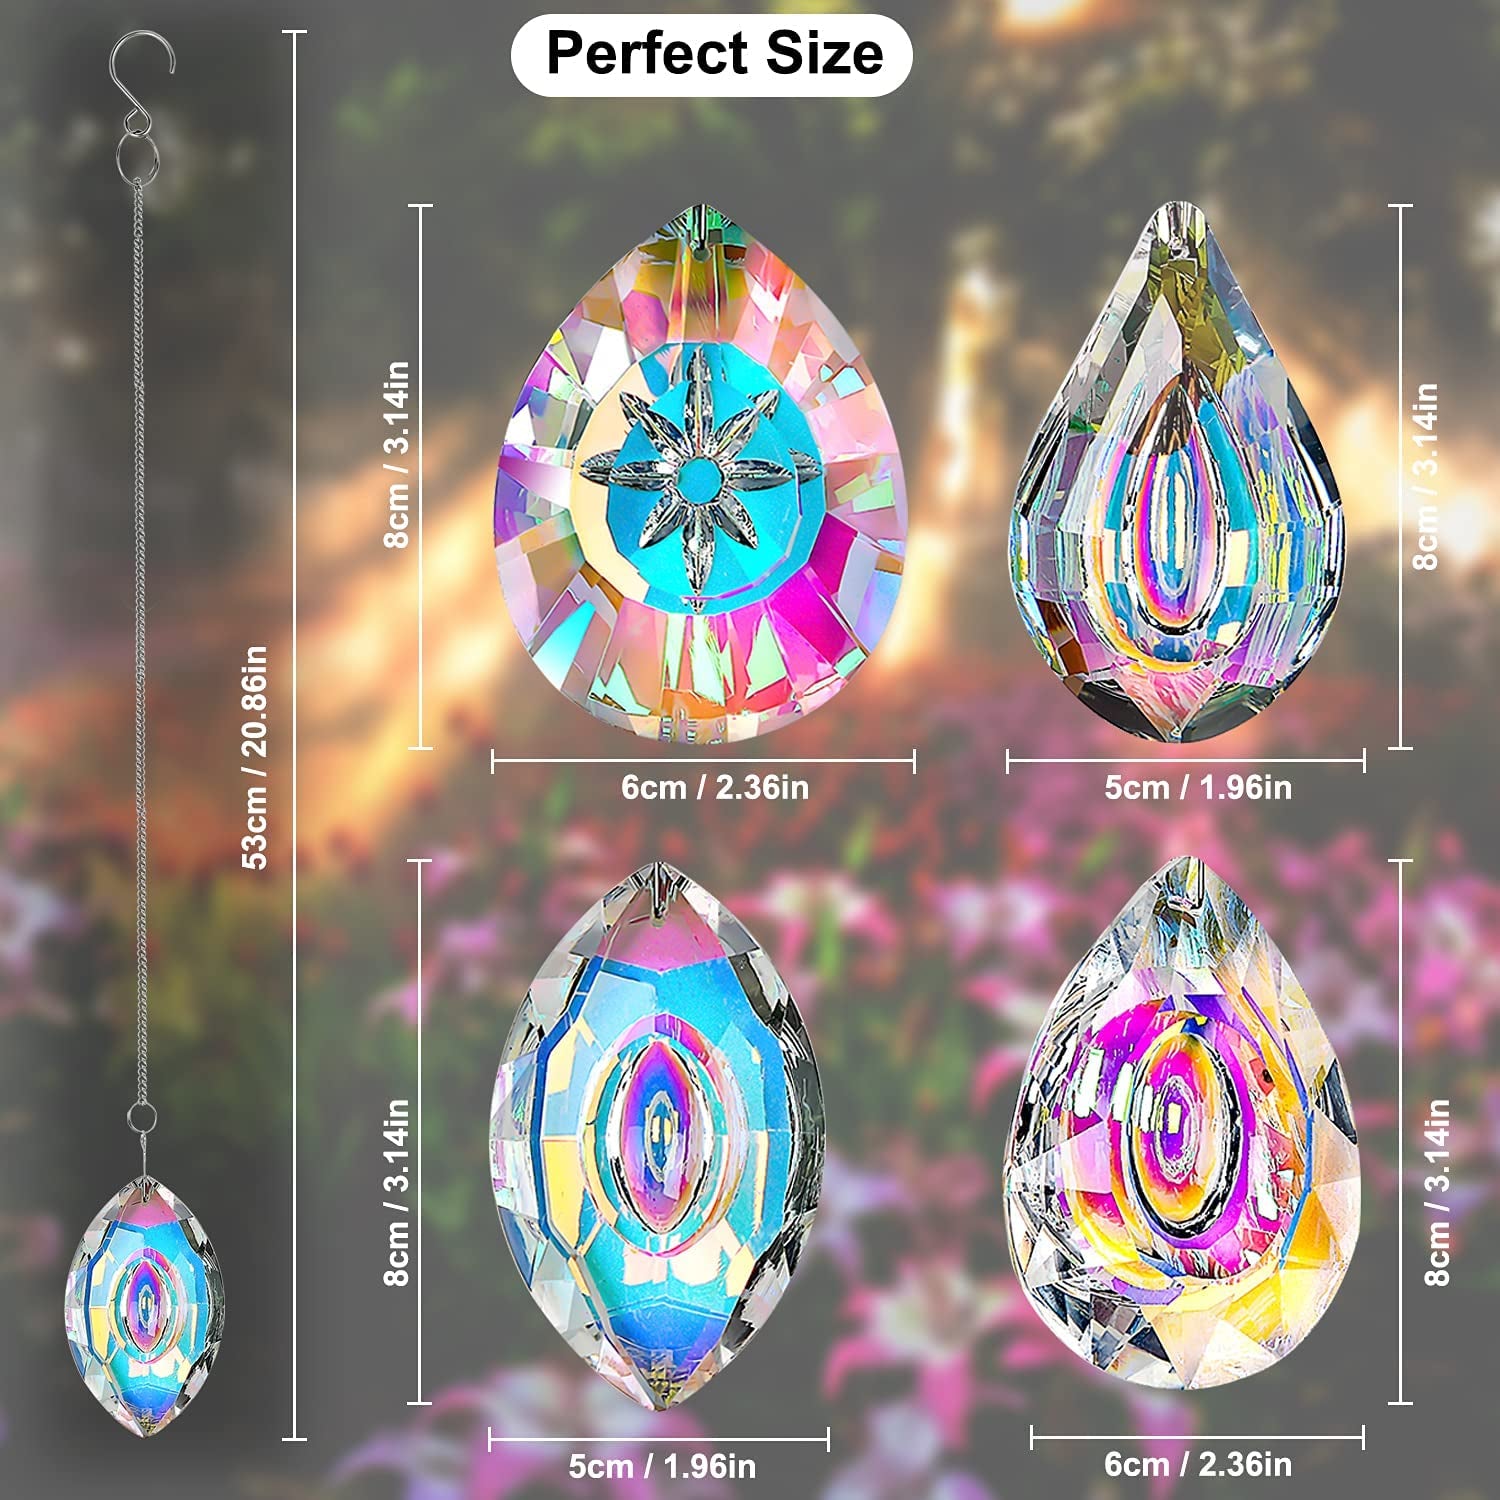 MerryNine, Merrynine Crystal Sunshine Catcher 76Mm/29.9" Colorful Hanging Prisms with 4 Metal Hanging Chains Windowsill Rainbow Pendant Wall Hanging Decoration(4 Pack